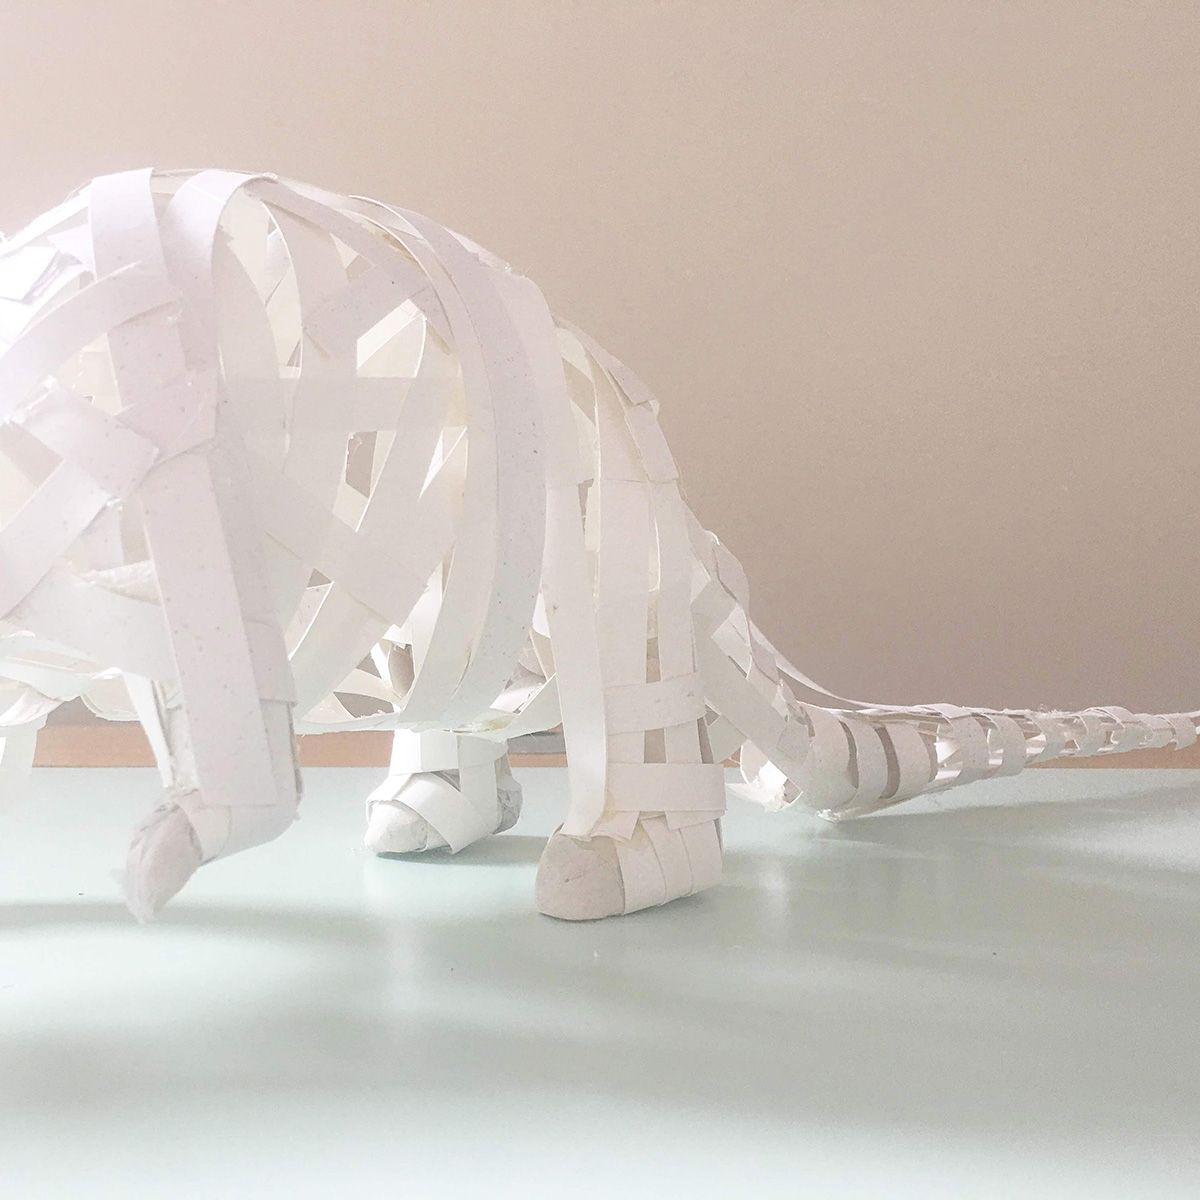 a frame of a pangolin made out of paper strips